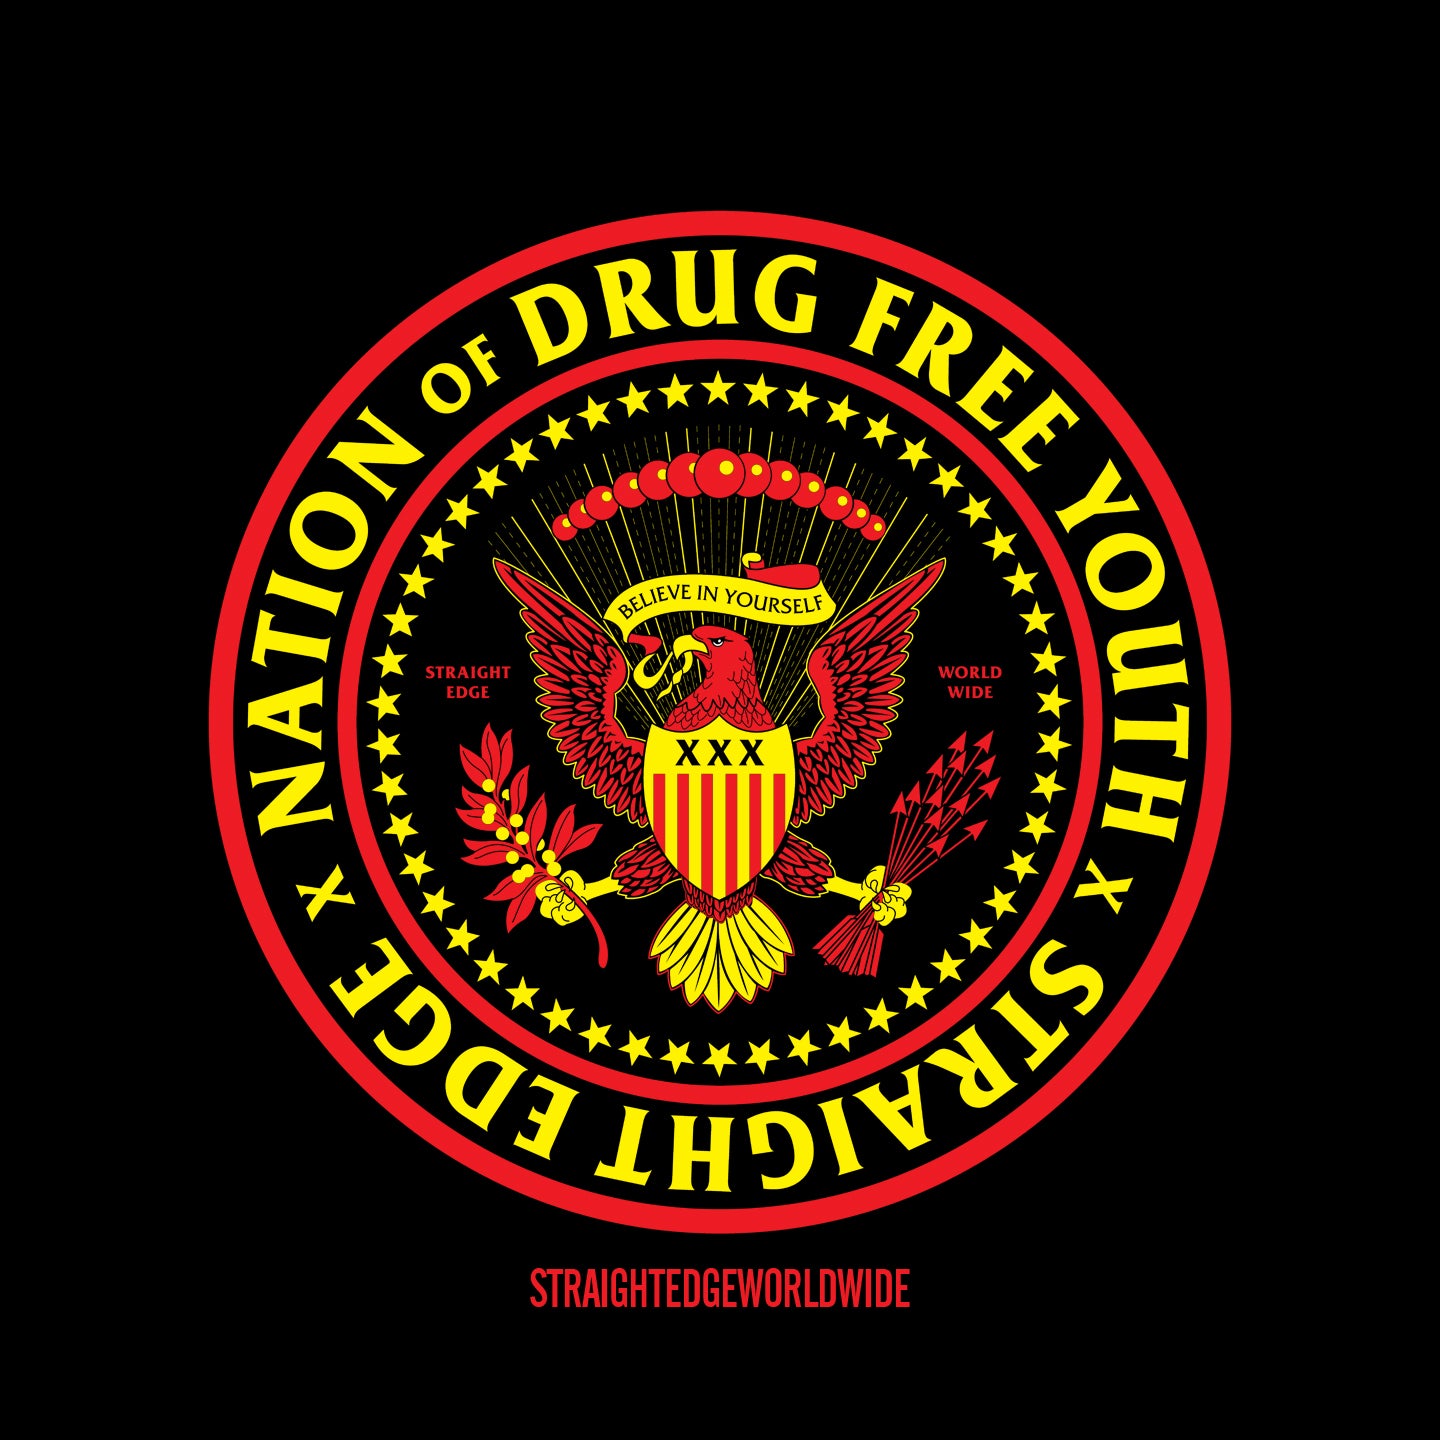 Nation of Drug Free Youth Straight Edge by STRAIGHTEDGEWORLDWIDE